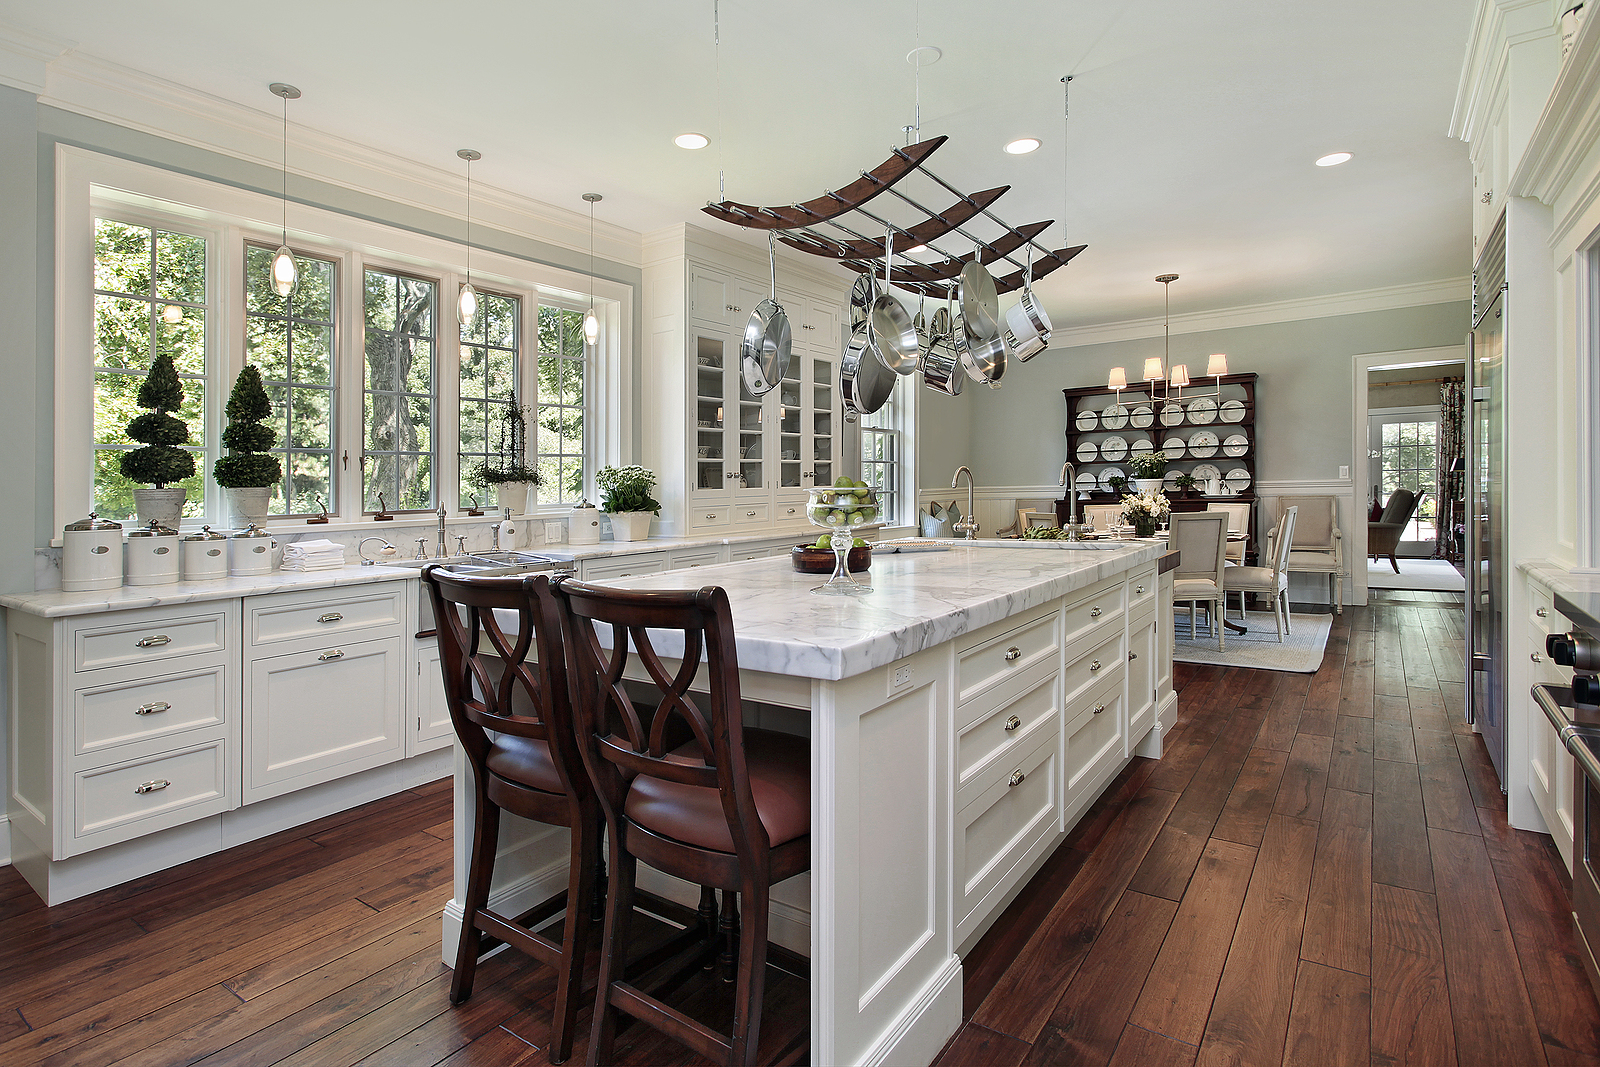 Timeless or trendy? How to choose kitchen upgrades that won't fade